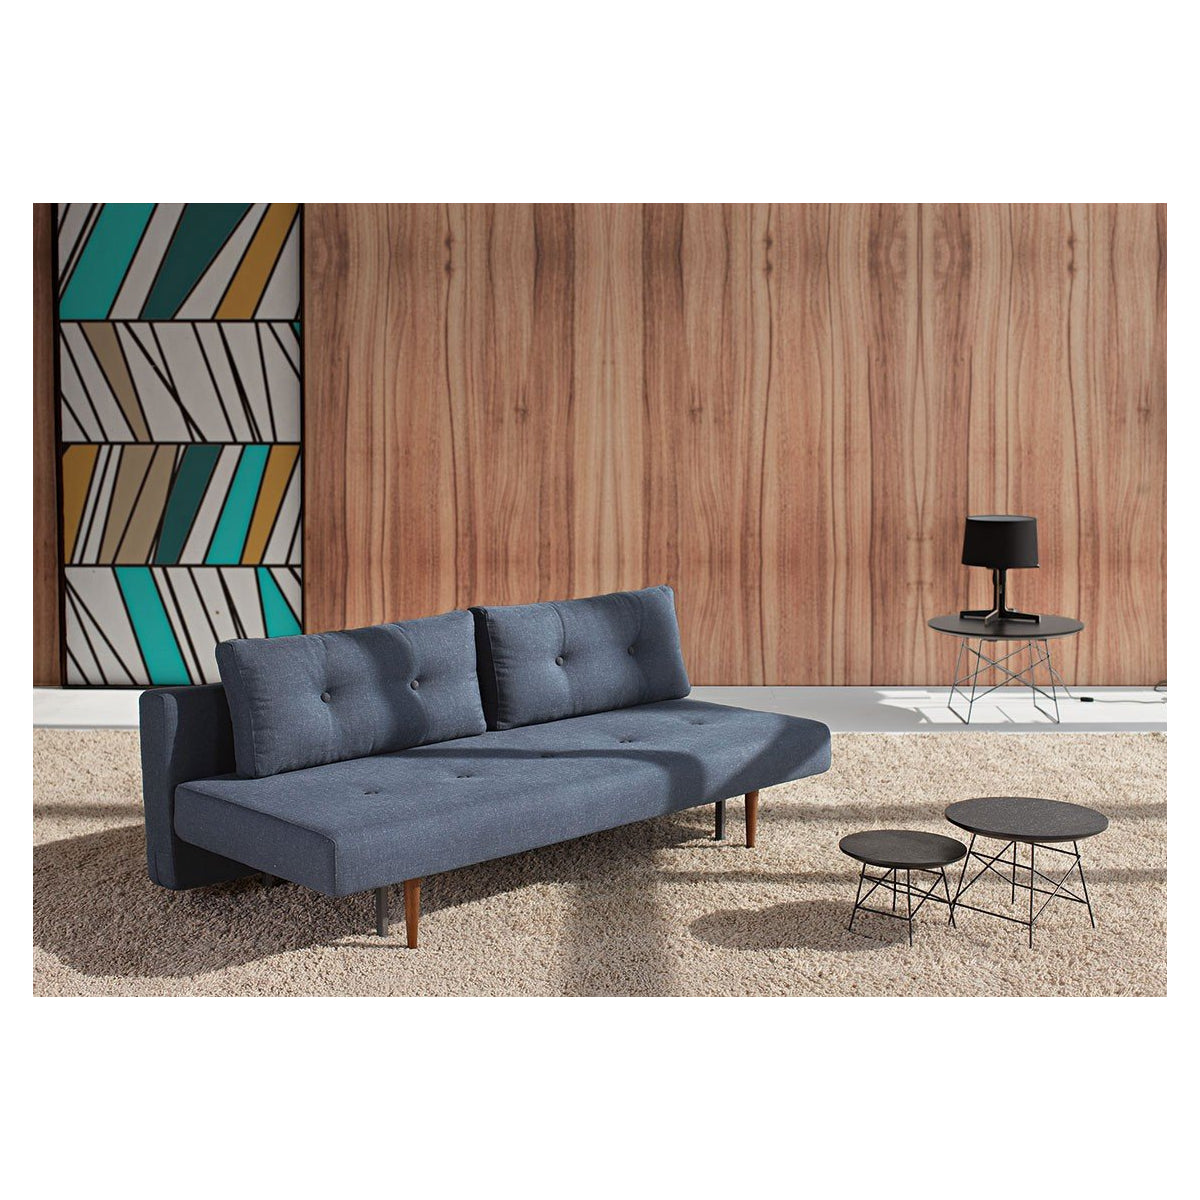 Load image into Gallery viewer, Recast Plus Sofa Bed Dark Styletto Daybed INNOVATION     Four Hands, Burke Decor, Mid Century Modern Furniture, Old Bones Furniture Company, Old Bones Co, Modern Mid Century, Designer Furniture, https://www.oldbonesco.com/
